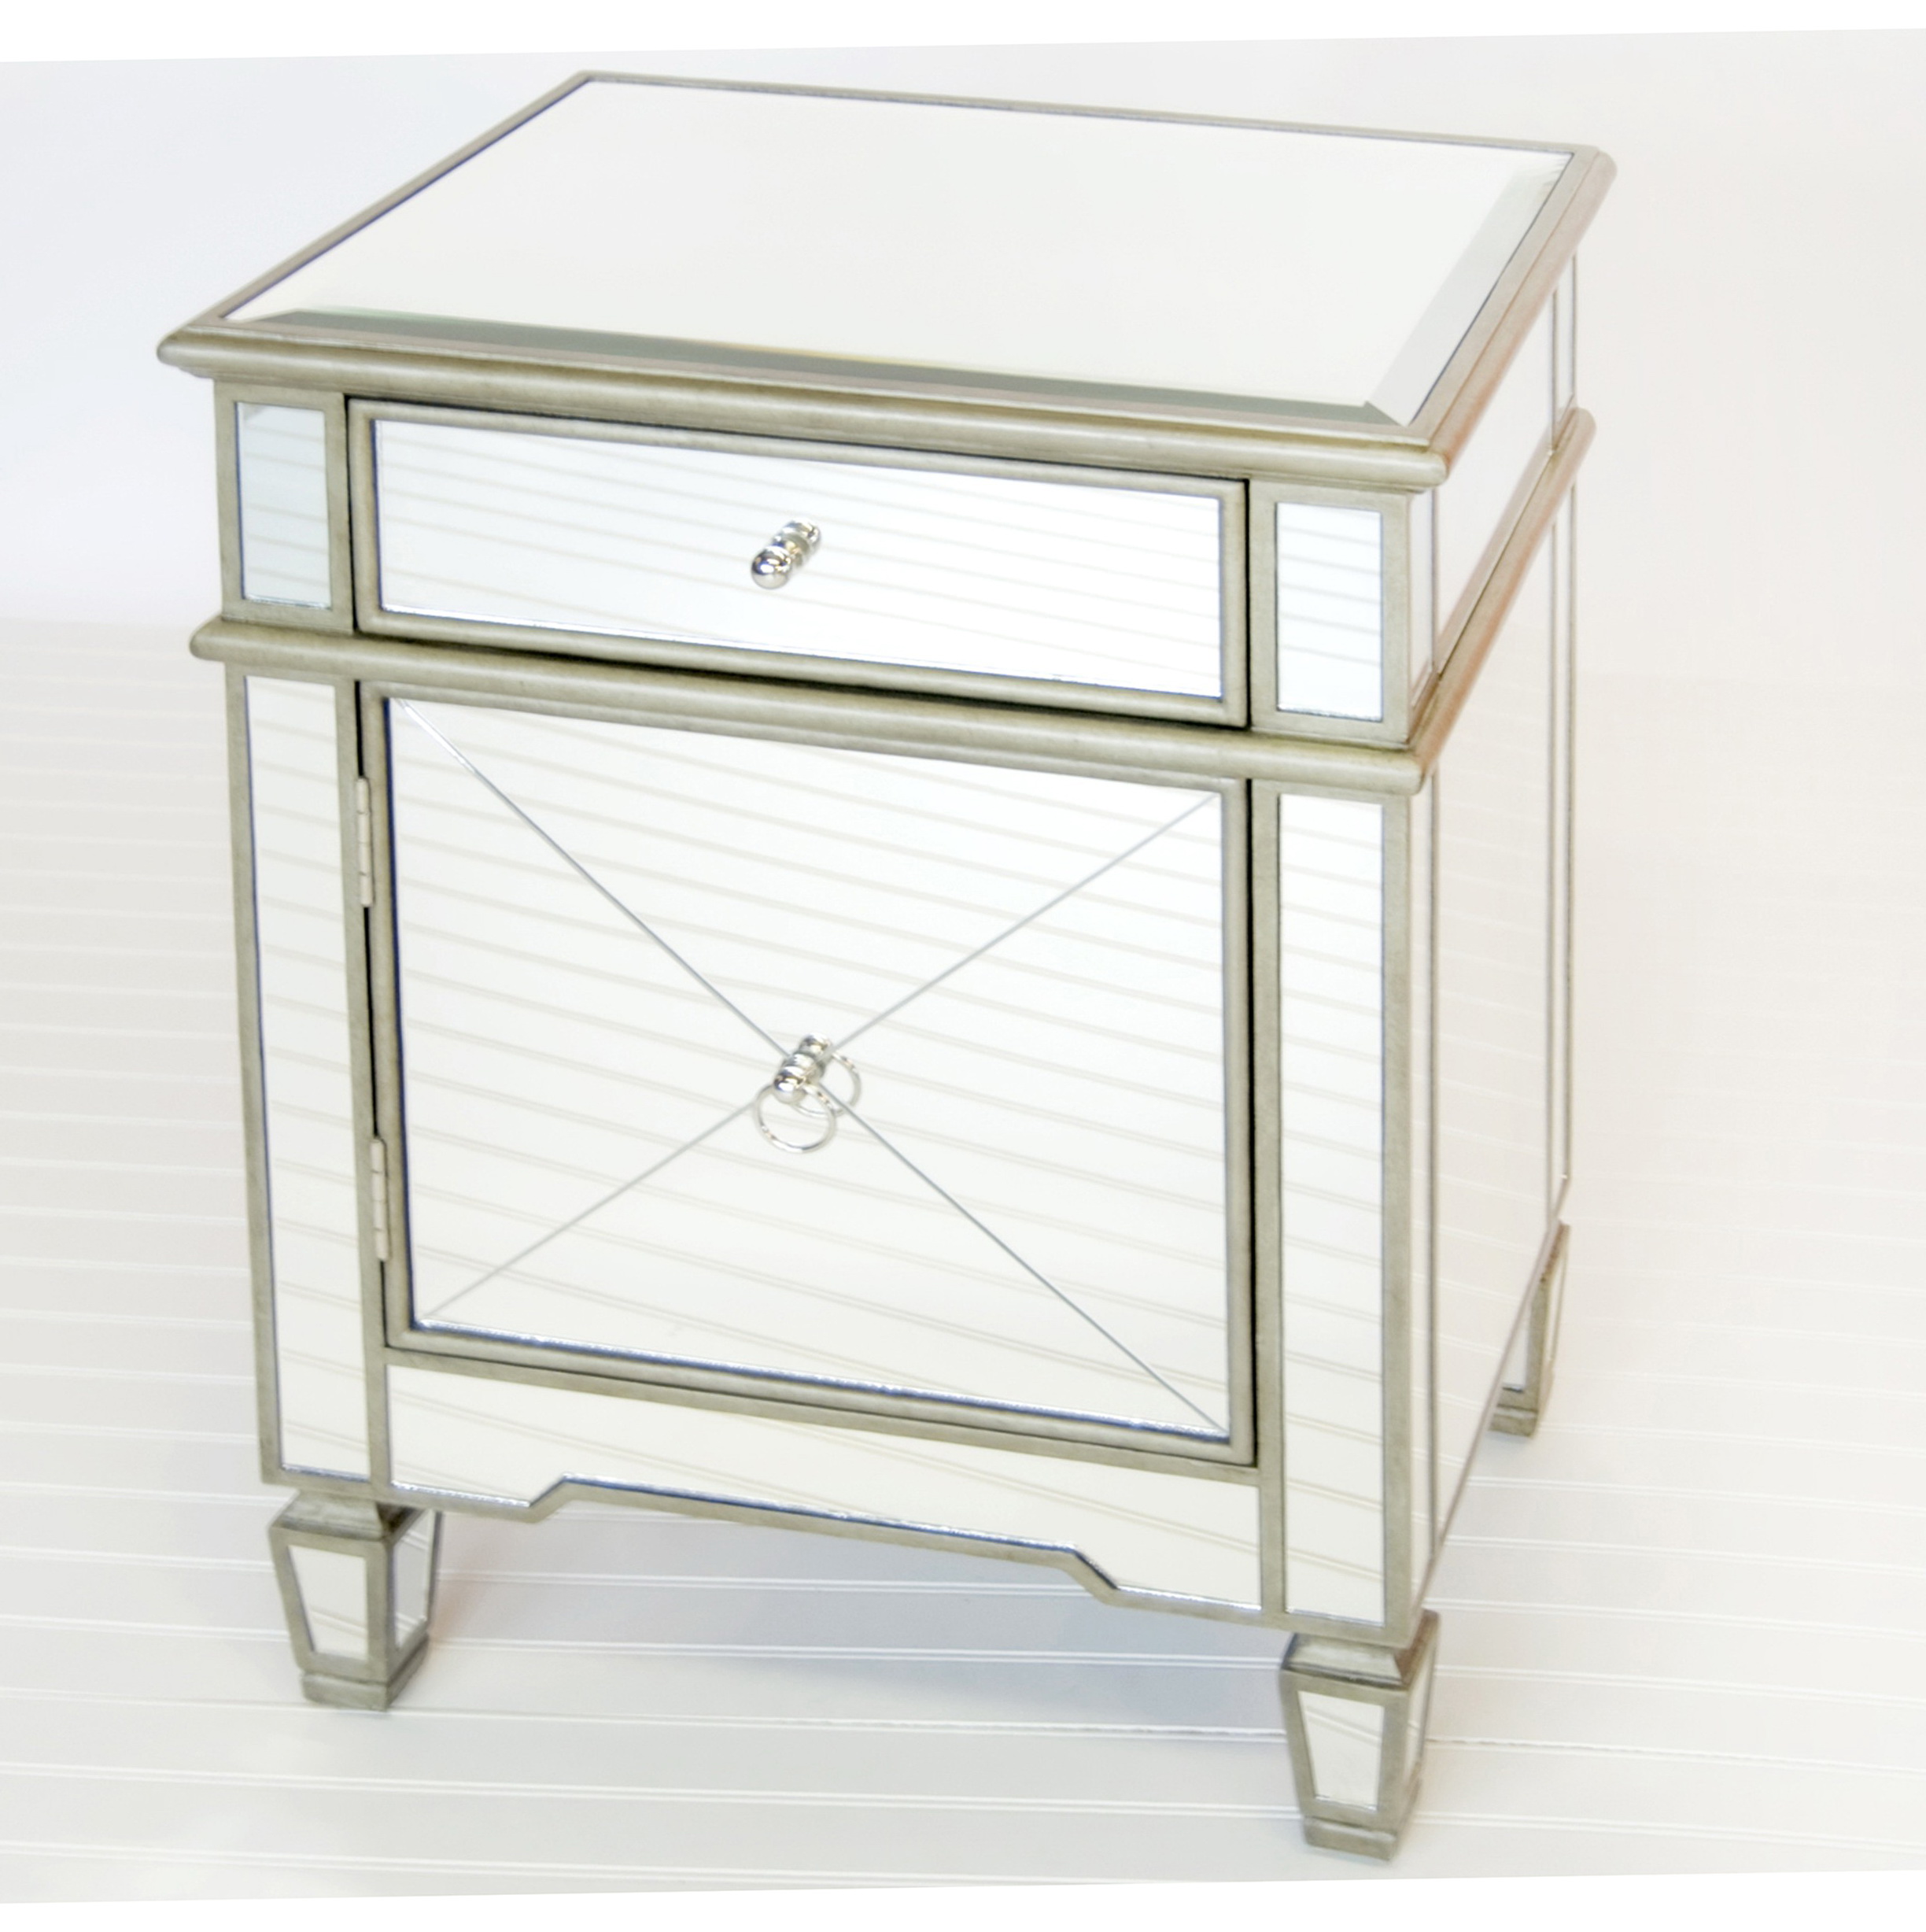 wood cube end table probably outrageous awesome mirrored accent tables mirror ideas with drawers drawer home design dining for tray rectangle blue oak white storage and chairs